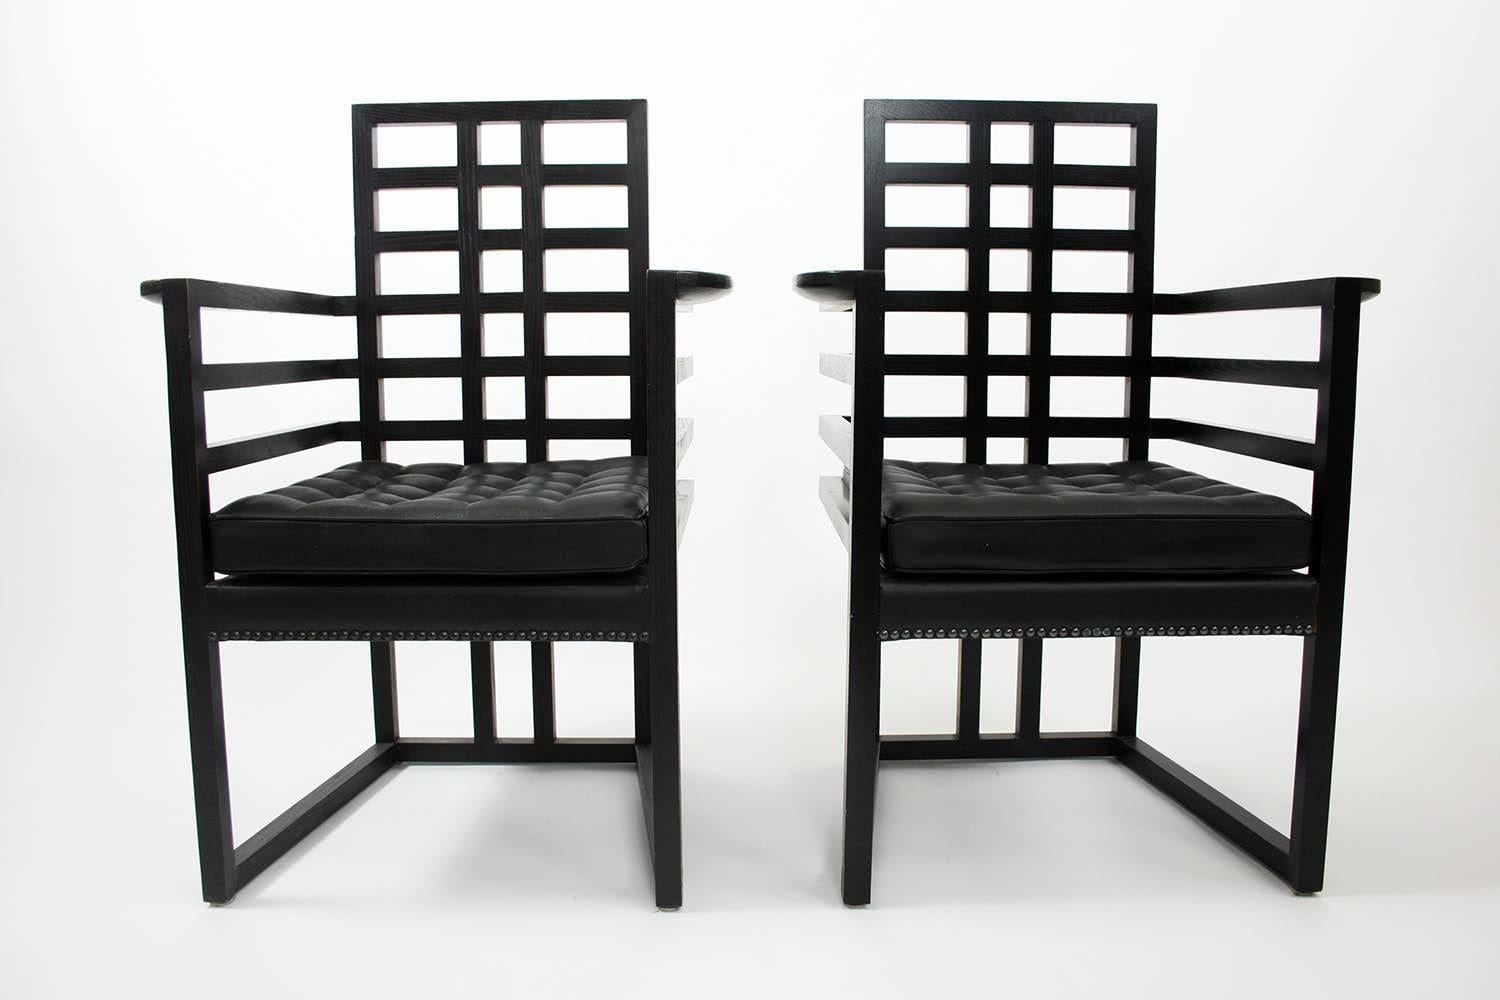 Pair of Josef Hoffmann Armloffel chairs made by Wittmann with leather seat cushions in excellent condition.

Dimensions: 38